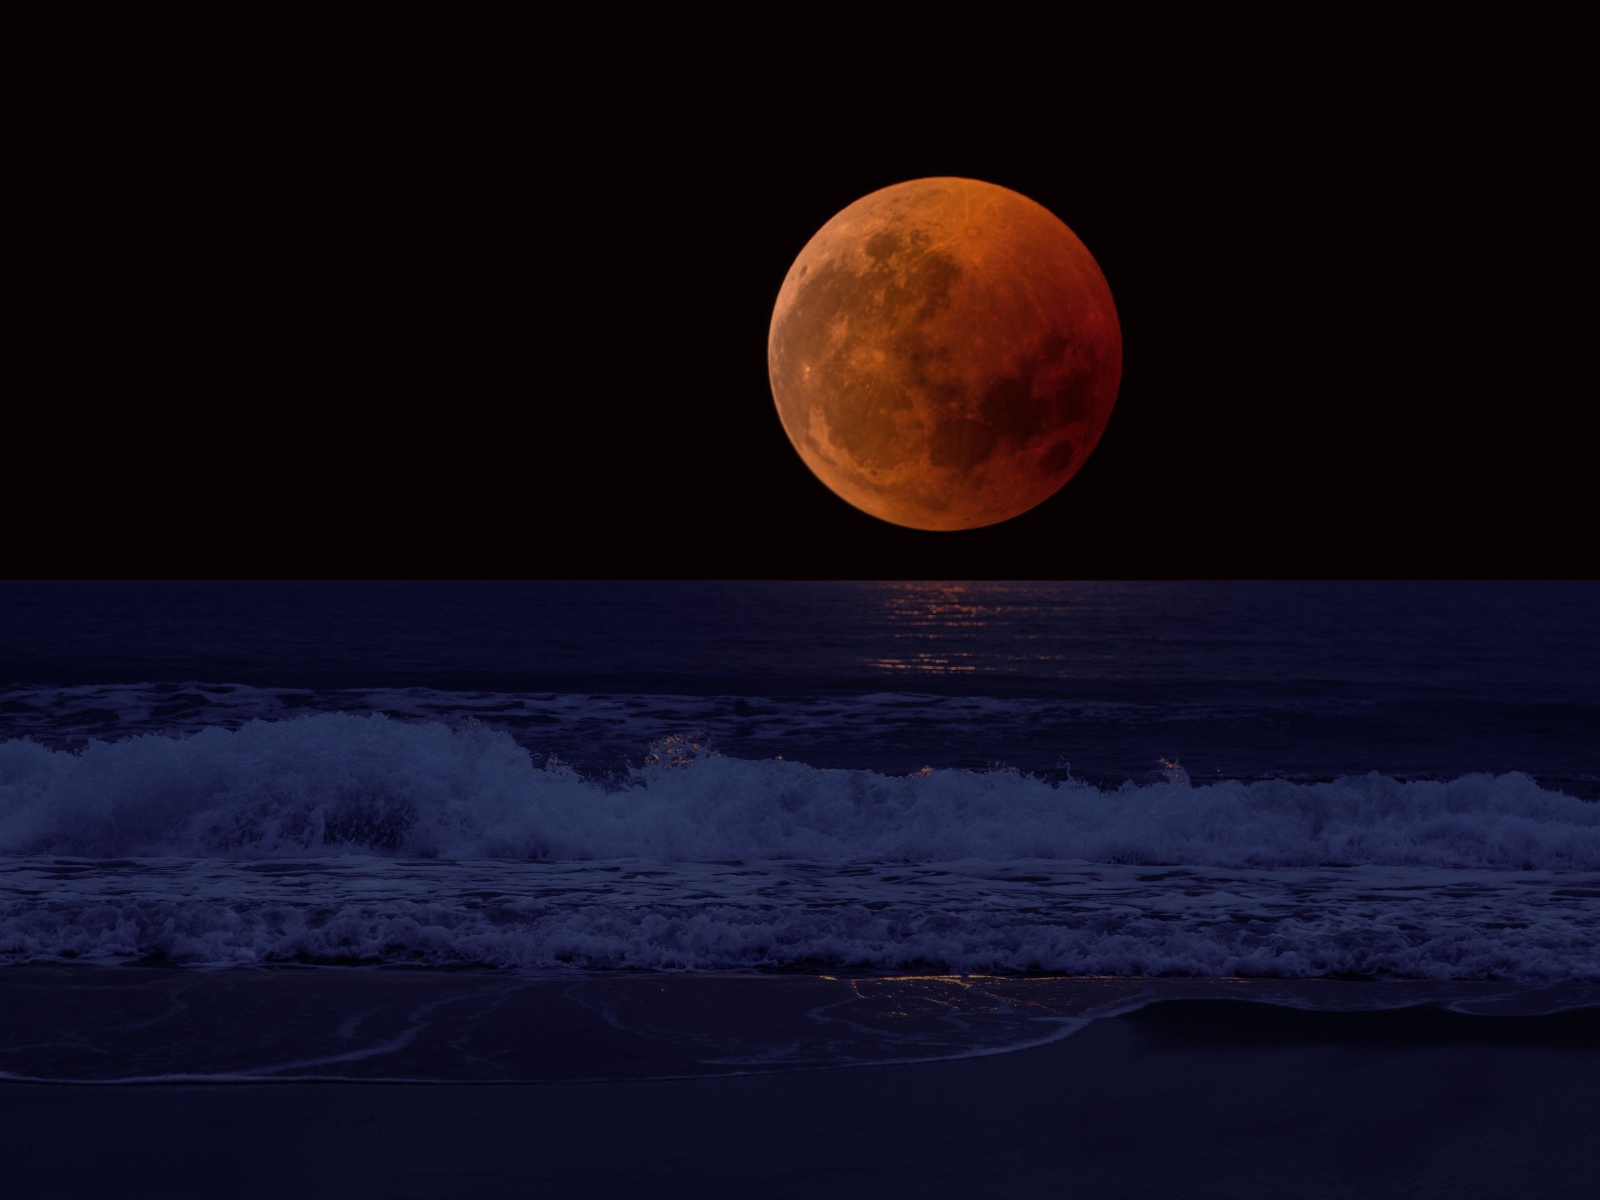 Big red moon in the dark sky over the sea